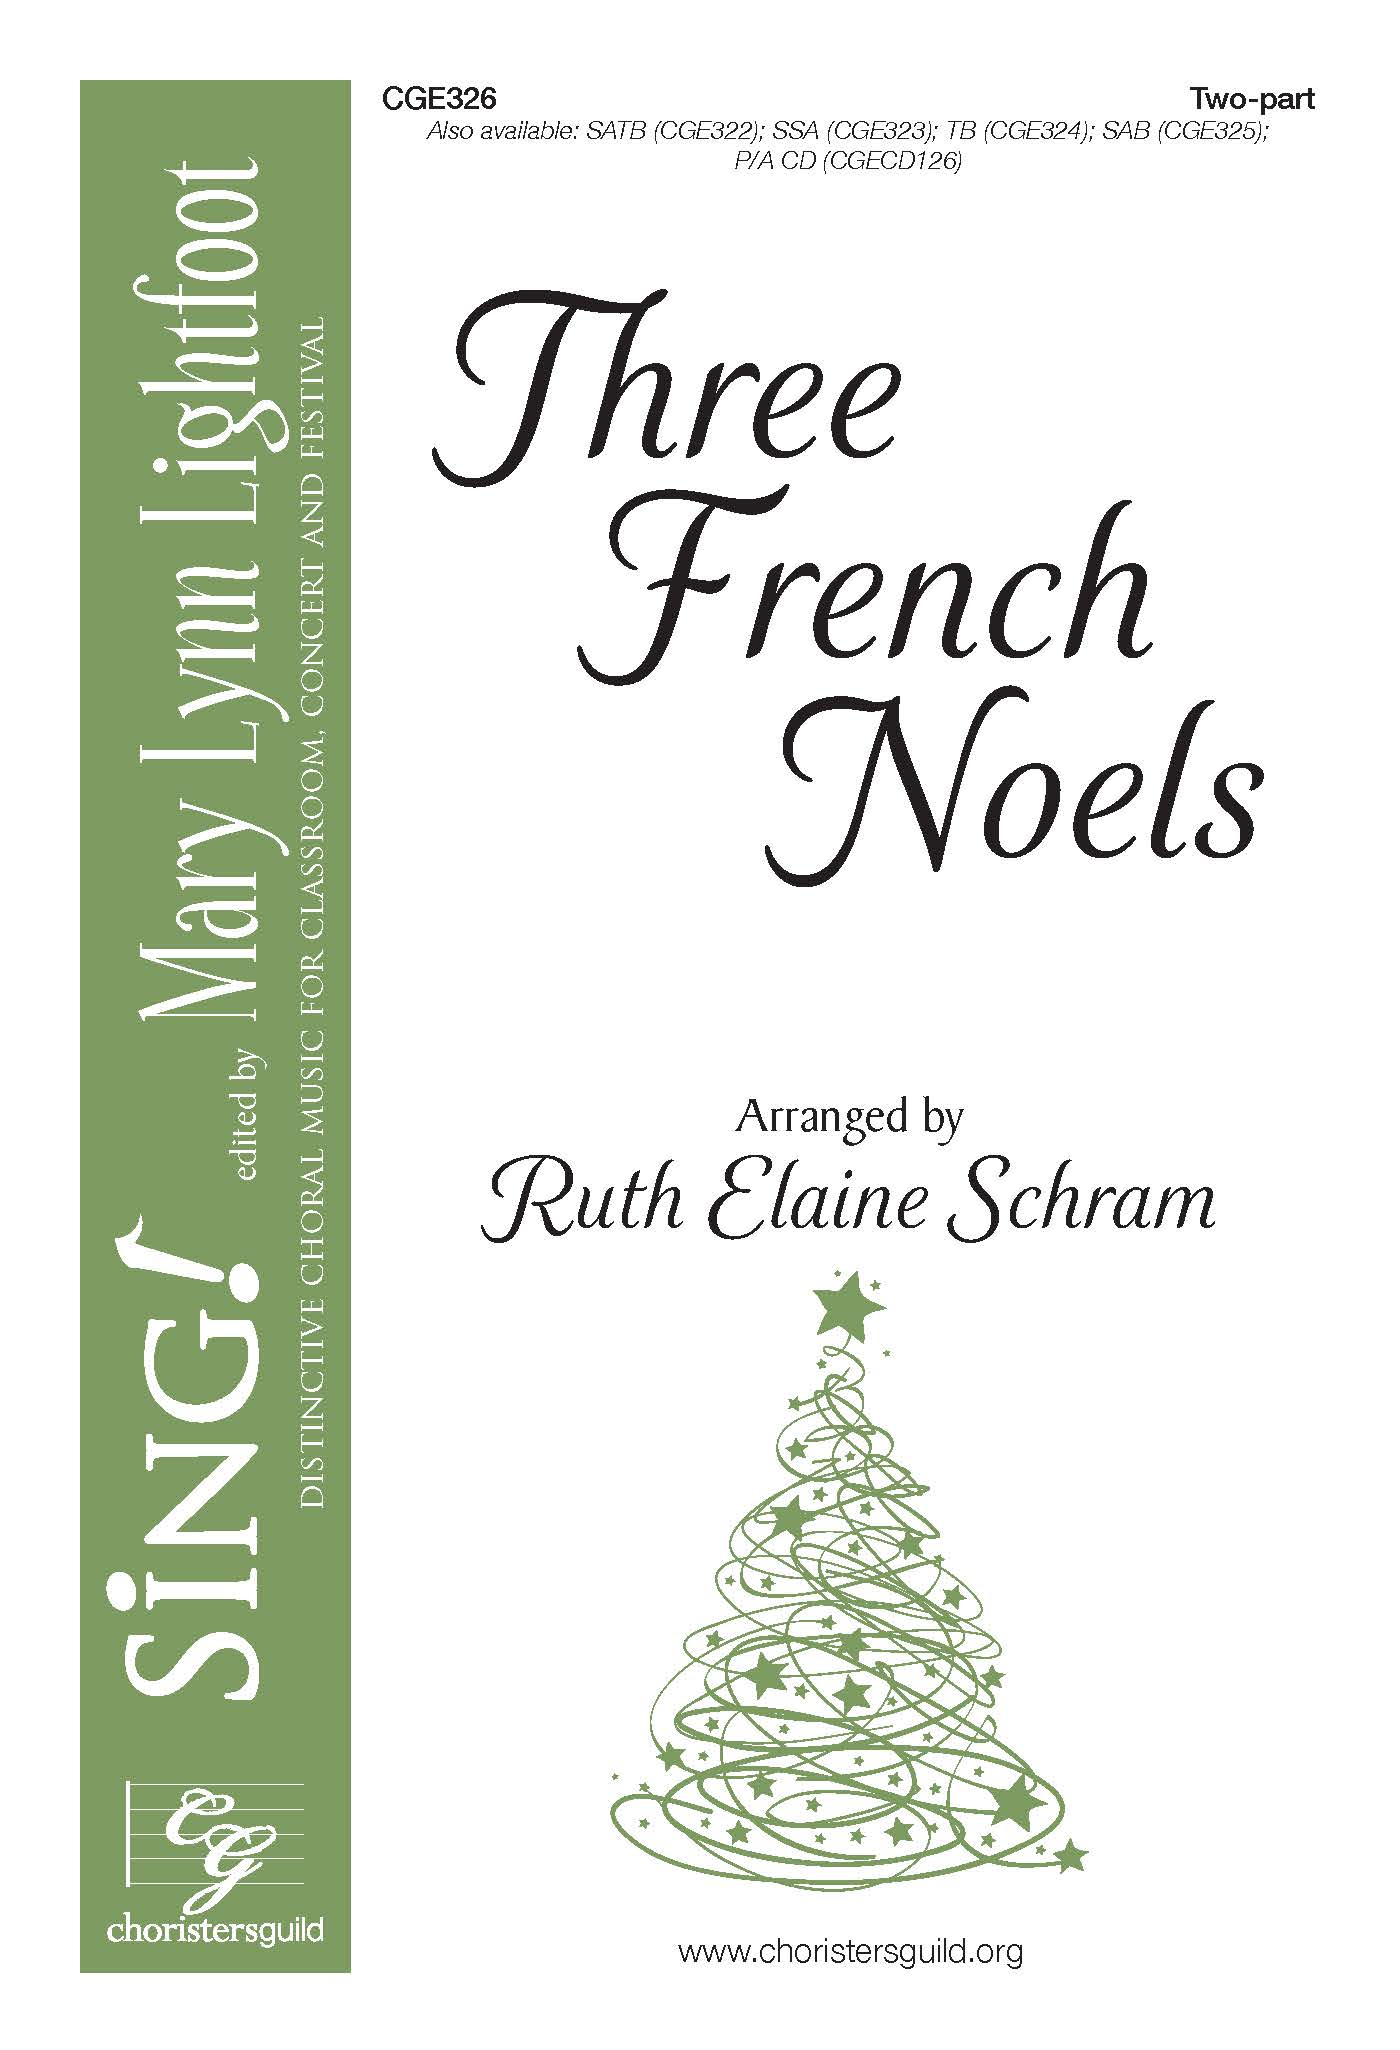 Three French Noels - Two-part